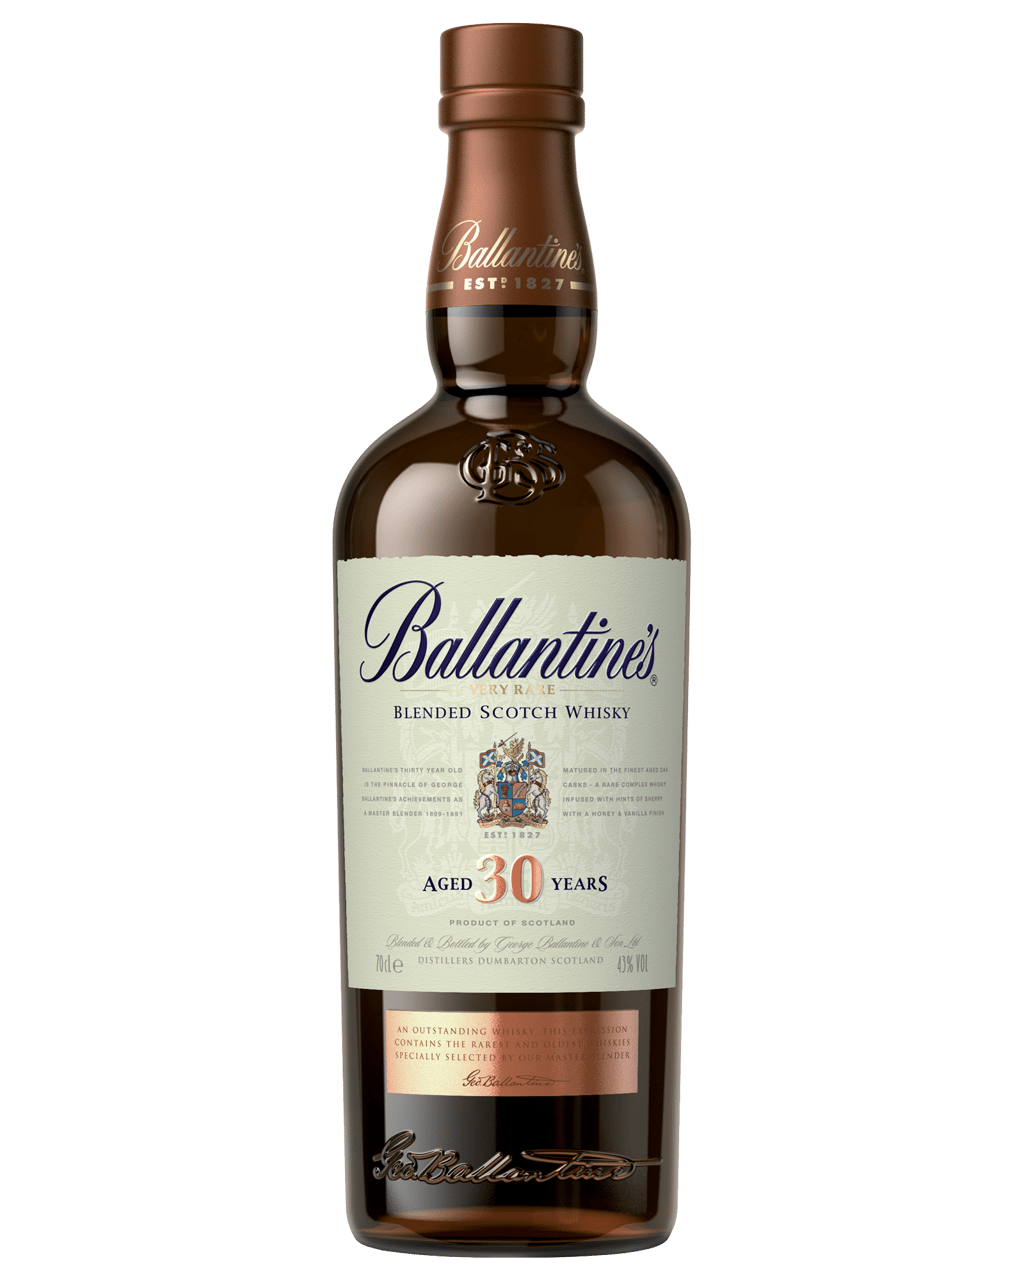 Buy Ballantine's 30 Year Old Scotch Whisky 700ml Online or Near